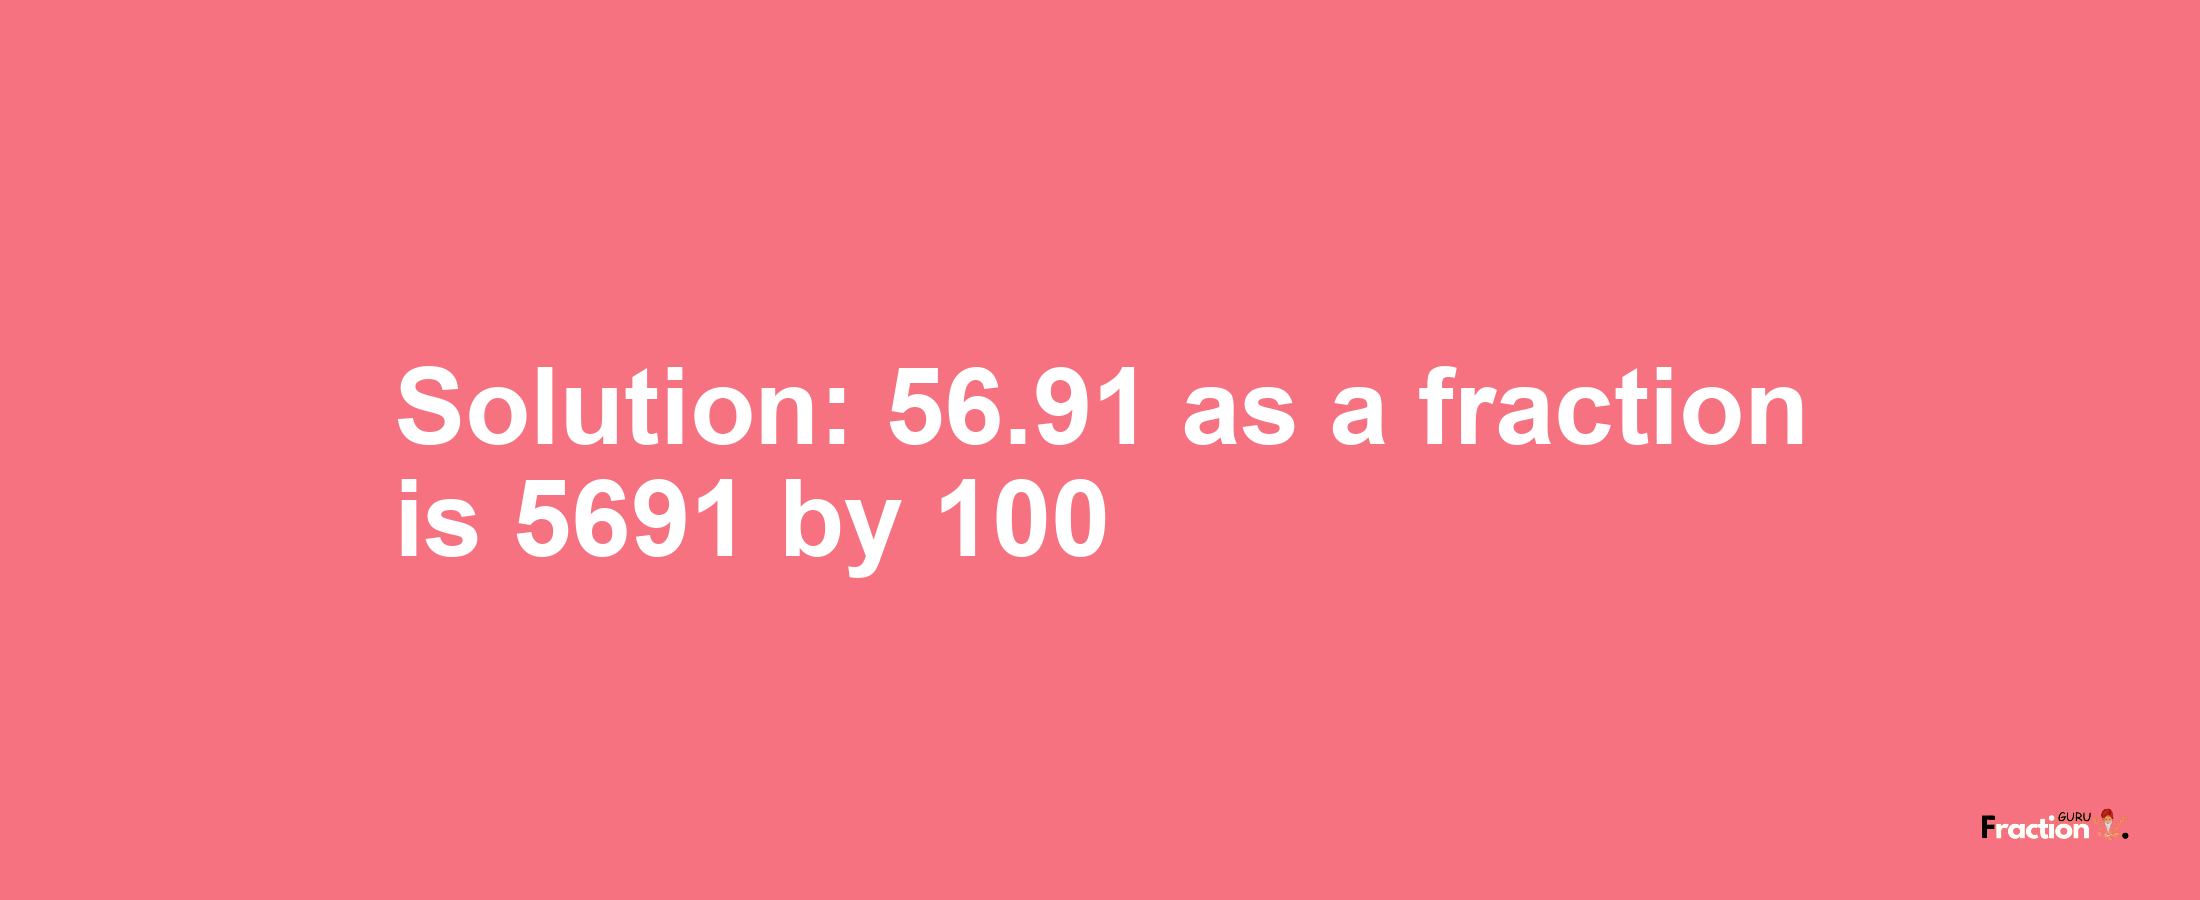 Solution:56.91 as a fraction is 5691/100